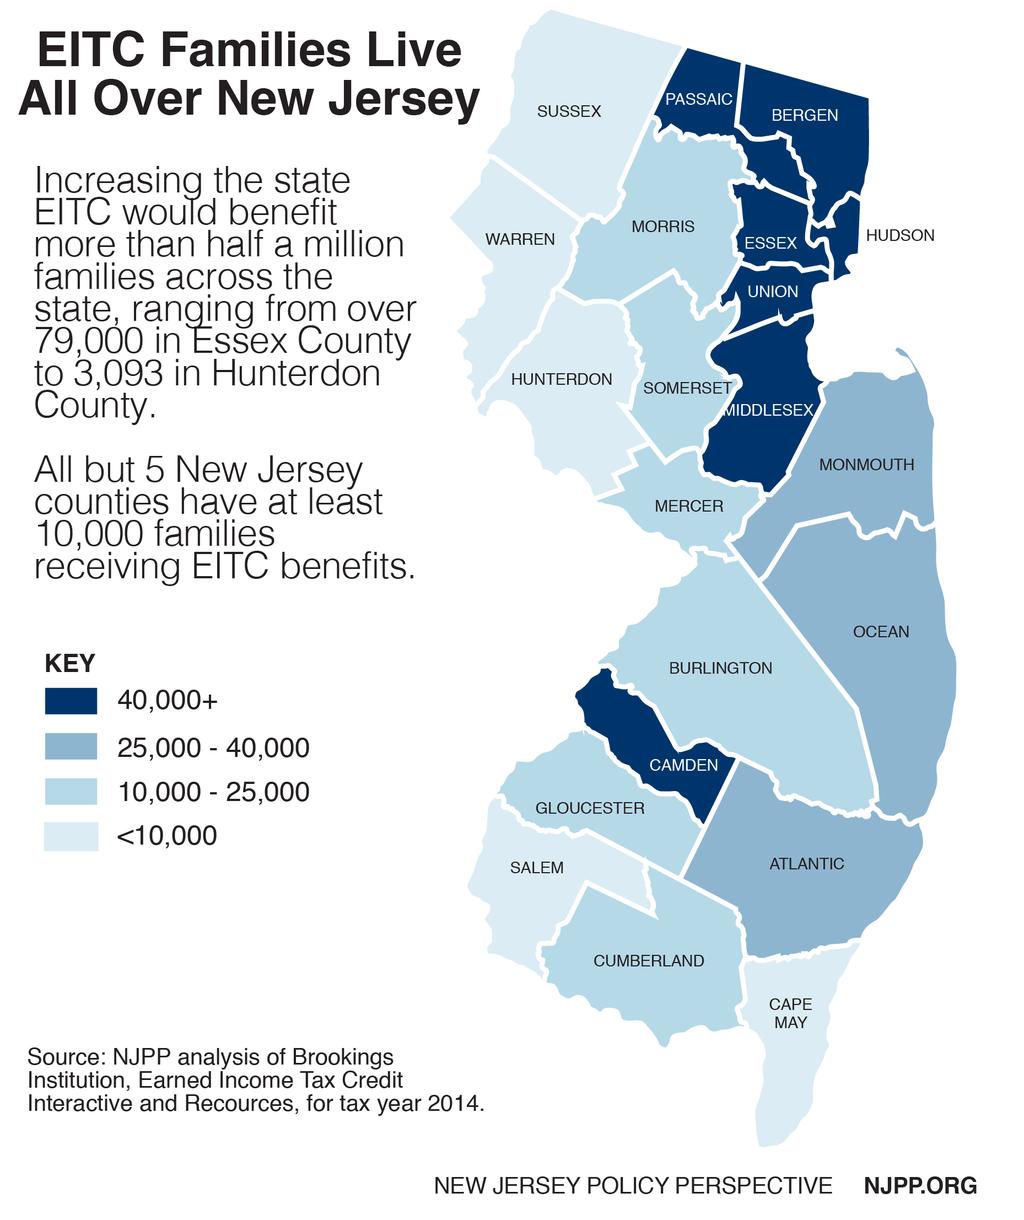 However, the large-scale tax package that included the fuel tax and EITC increases also included more than $1.